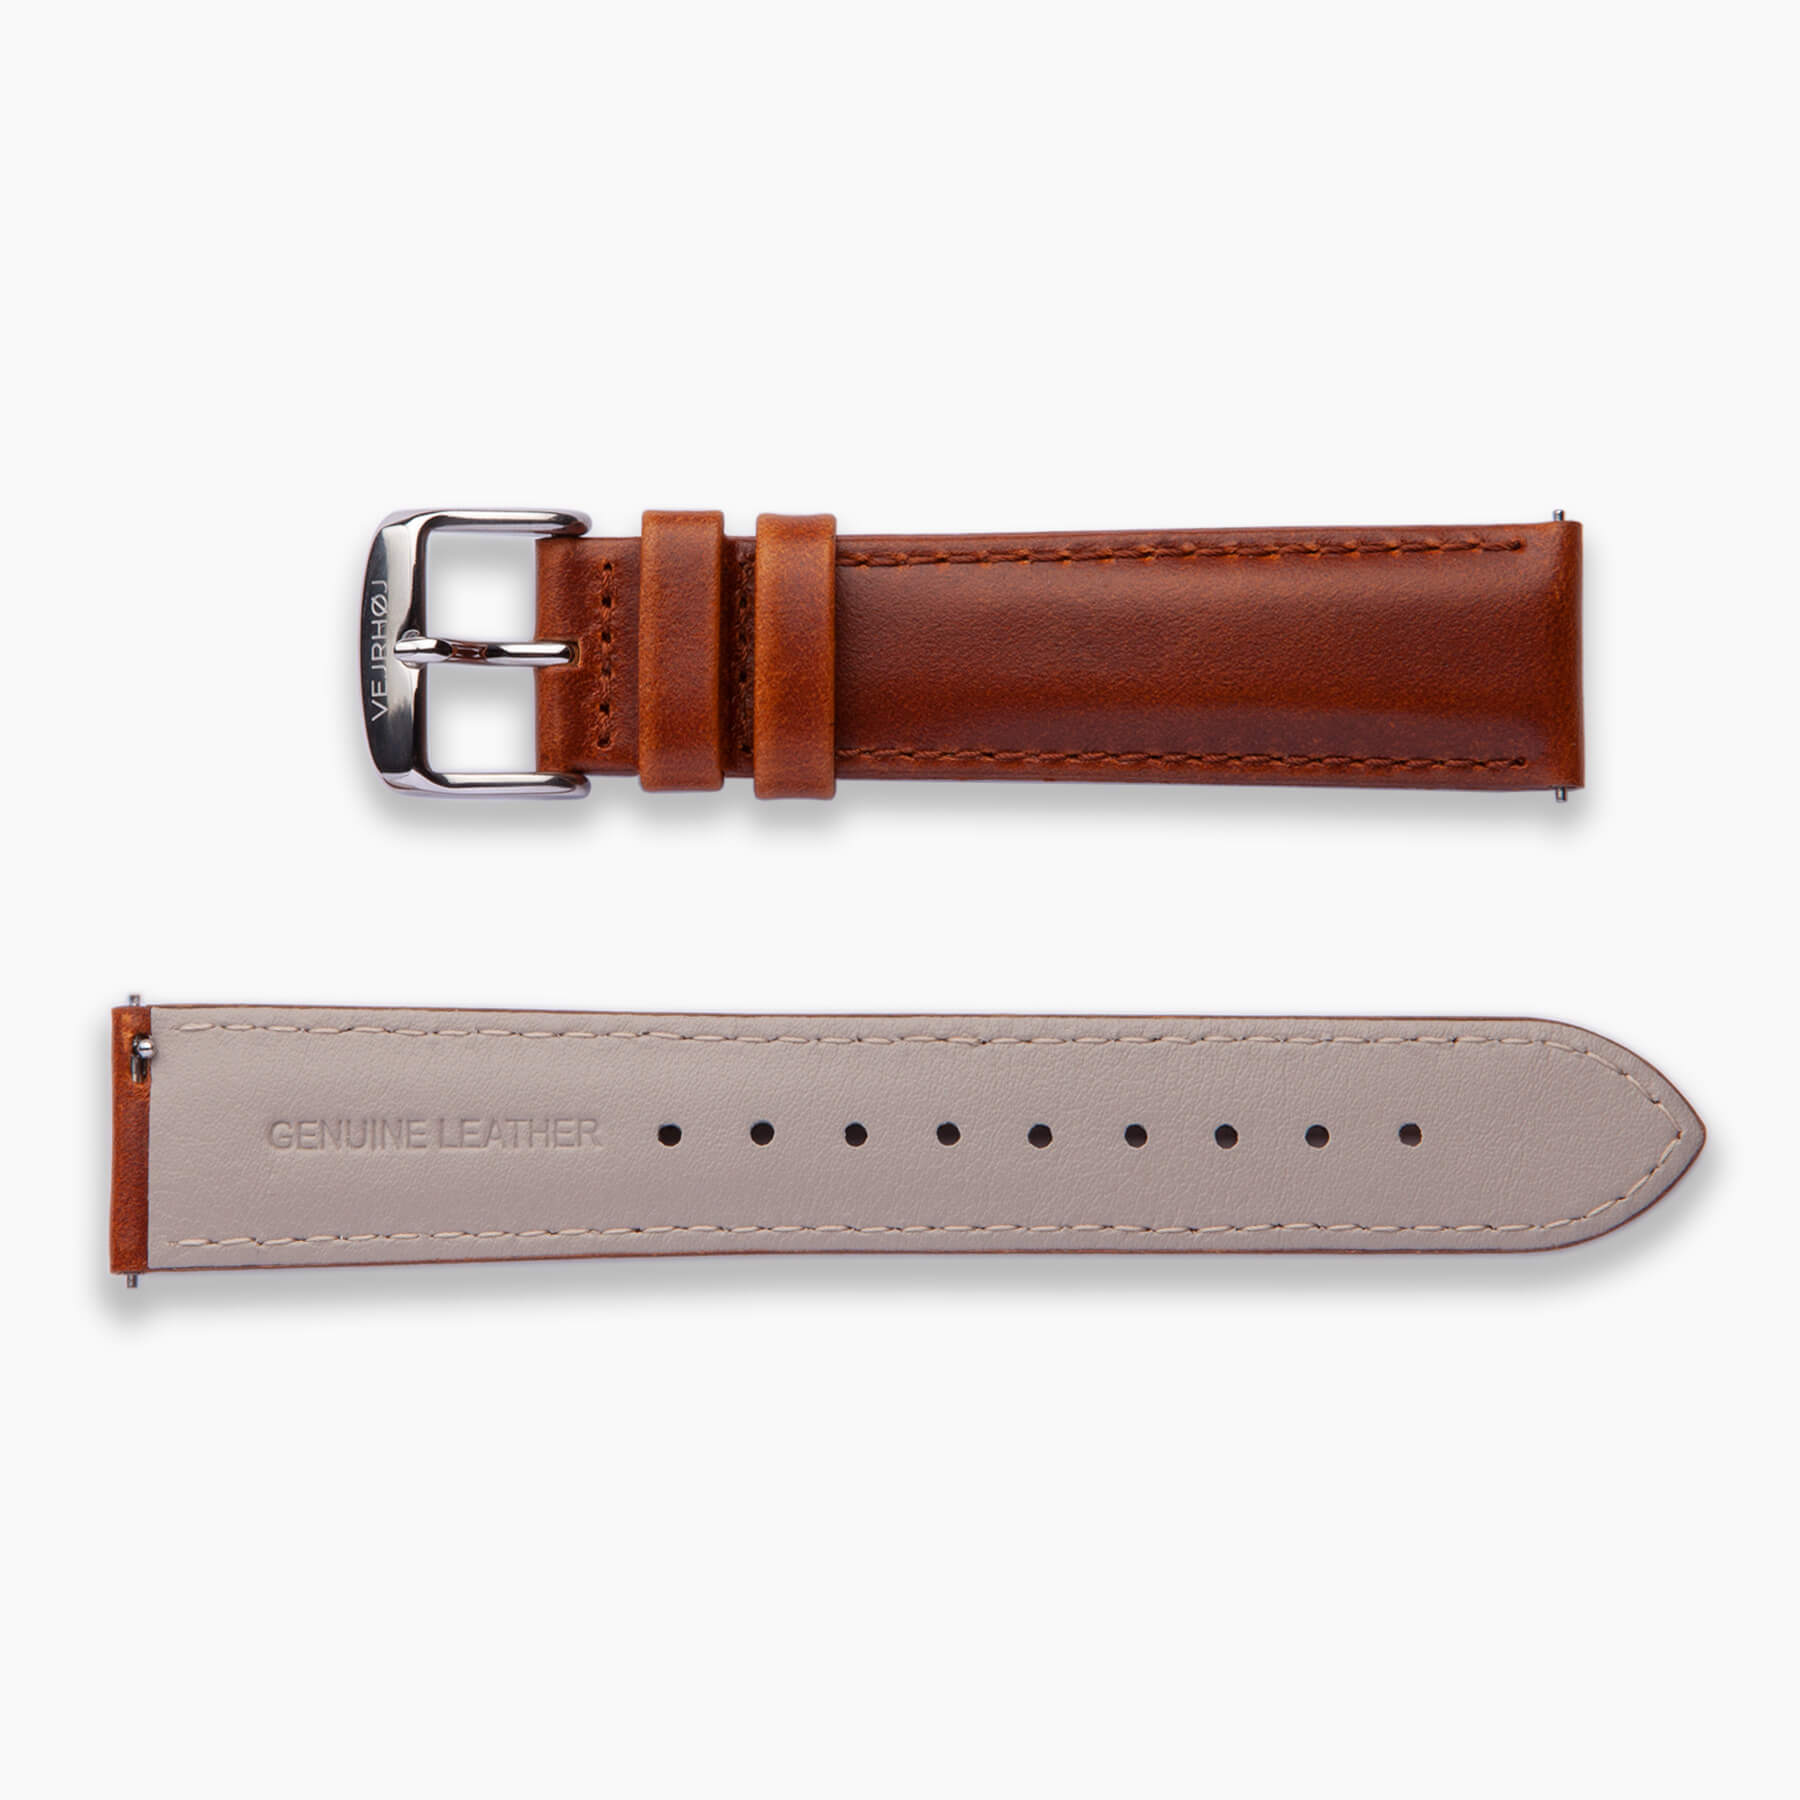 Caramel colored strap with silver buckle